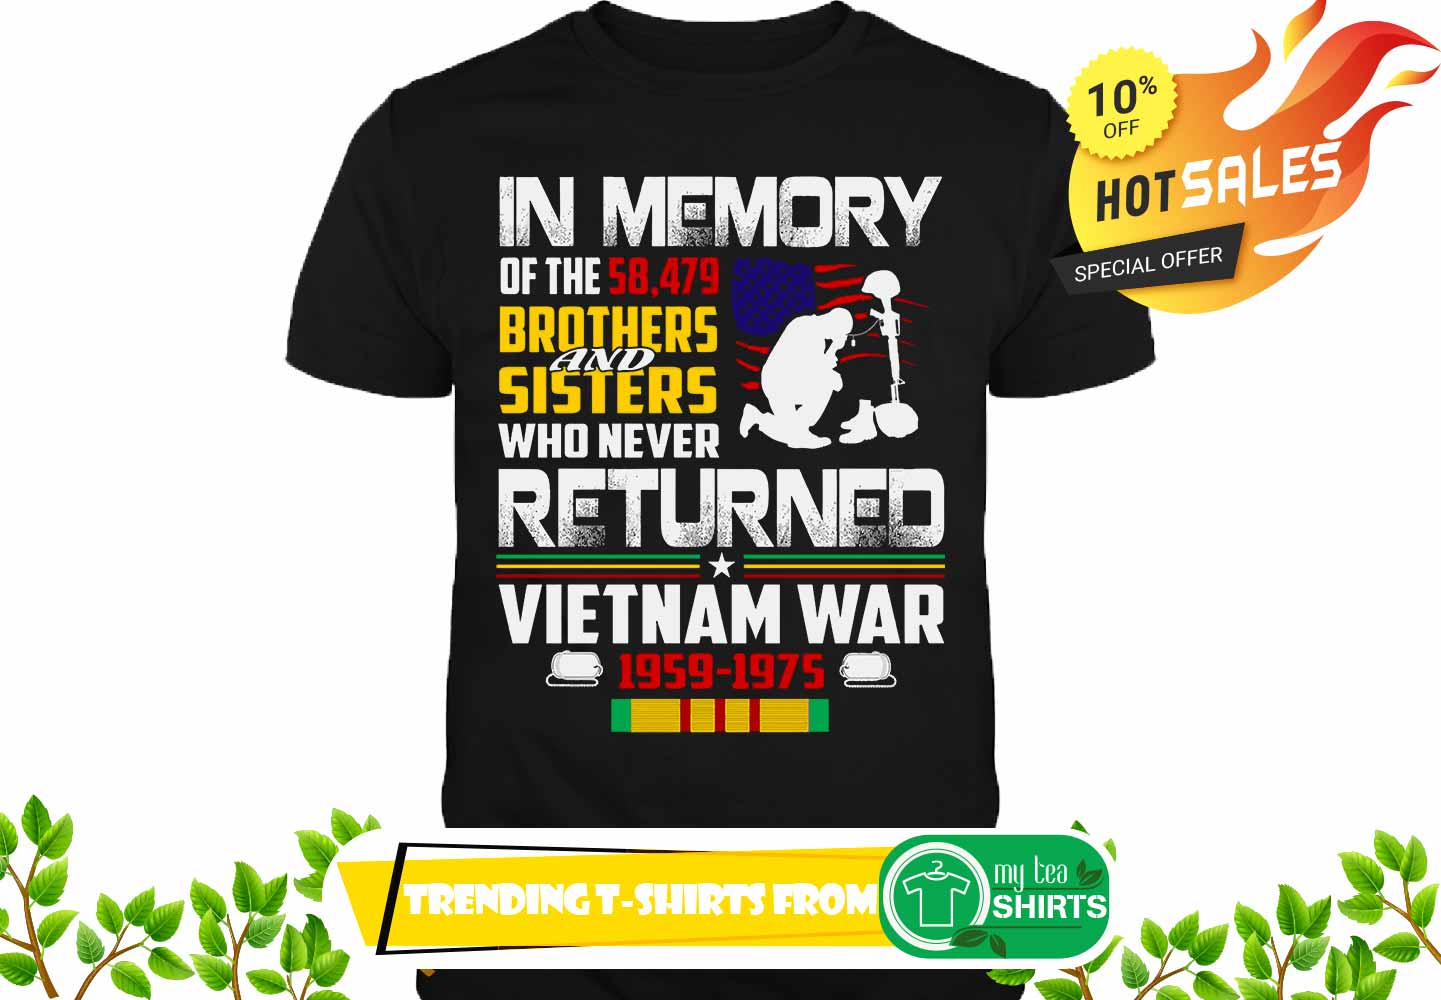 In memory of 58, 479 brothers & sisters who never returned shirt